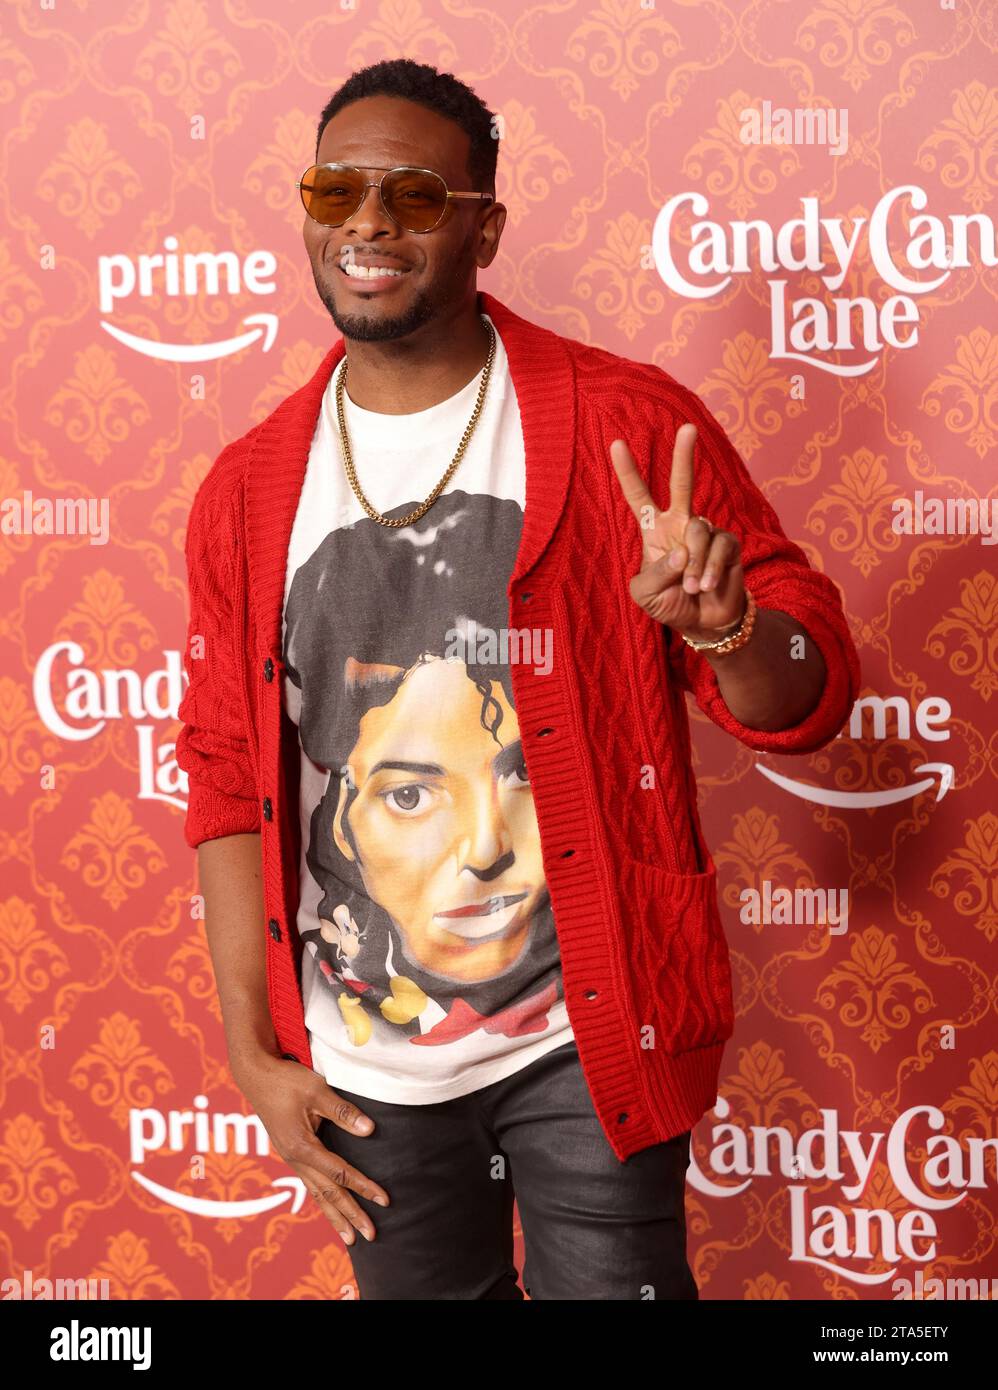 Los Angeles, United States. 28th Nov, 2023. Kel Mitchell attends the world premiere of Amazon Prime Video's 'Candy Cane Lane' at Regency Village Theatre in Los Angeles, California on November 28, 2023. Storyline: A man is determined to win the neighborhood's annual Christmas decorating contest. He makes a pact with an elf to help him win--and the elf casts a spell that brings the 12 days of Christmas to life, which brings unexpected chaos to town. Photo by Greg Grudt/UPI Credit: UPI/Alamy Live News Stock Photo